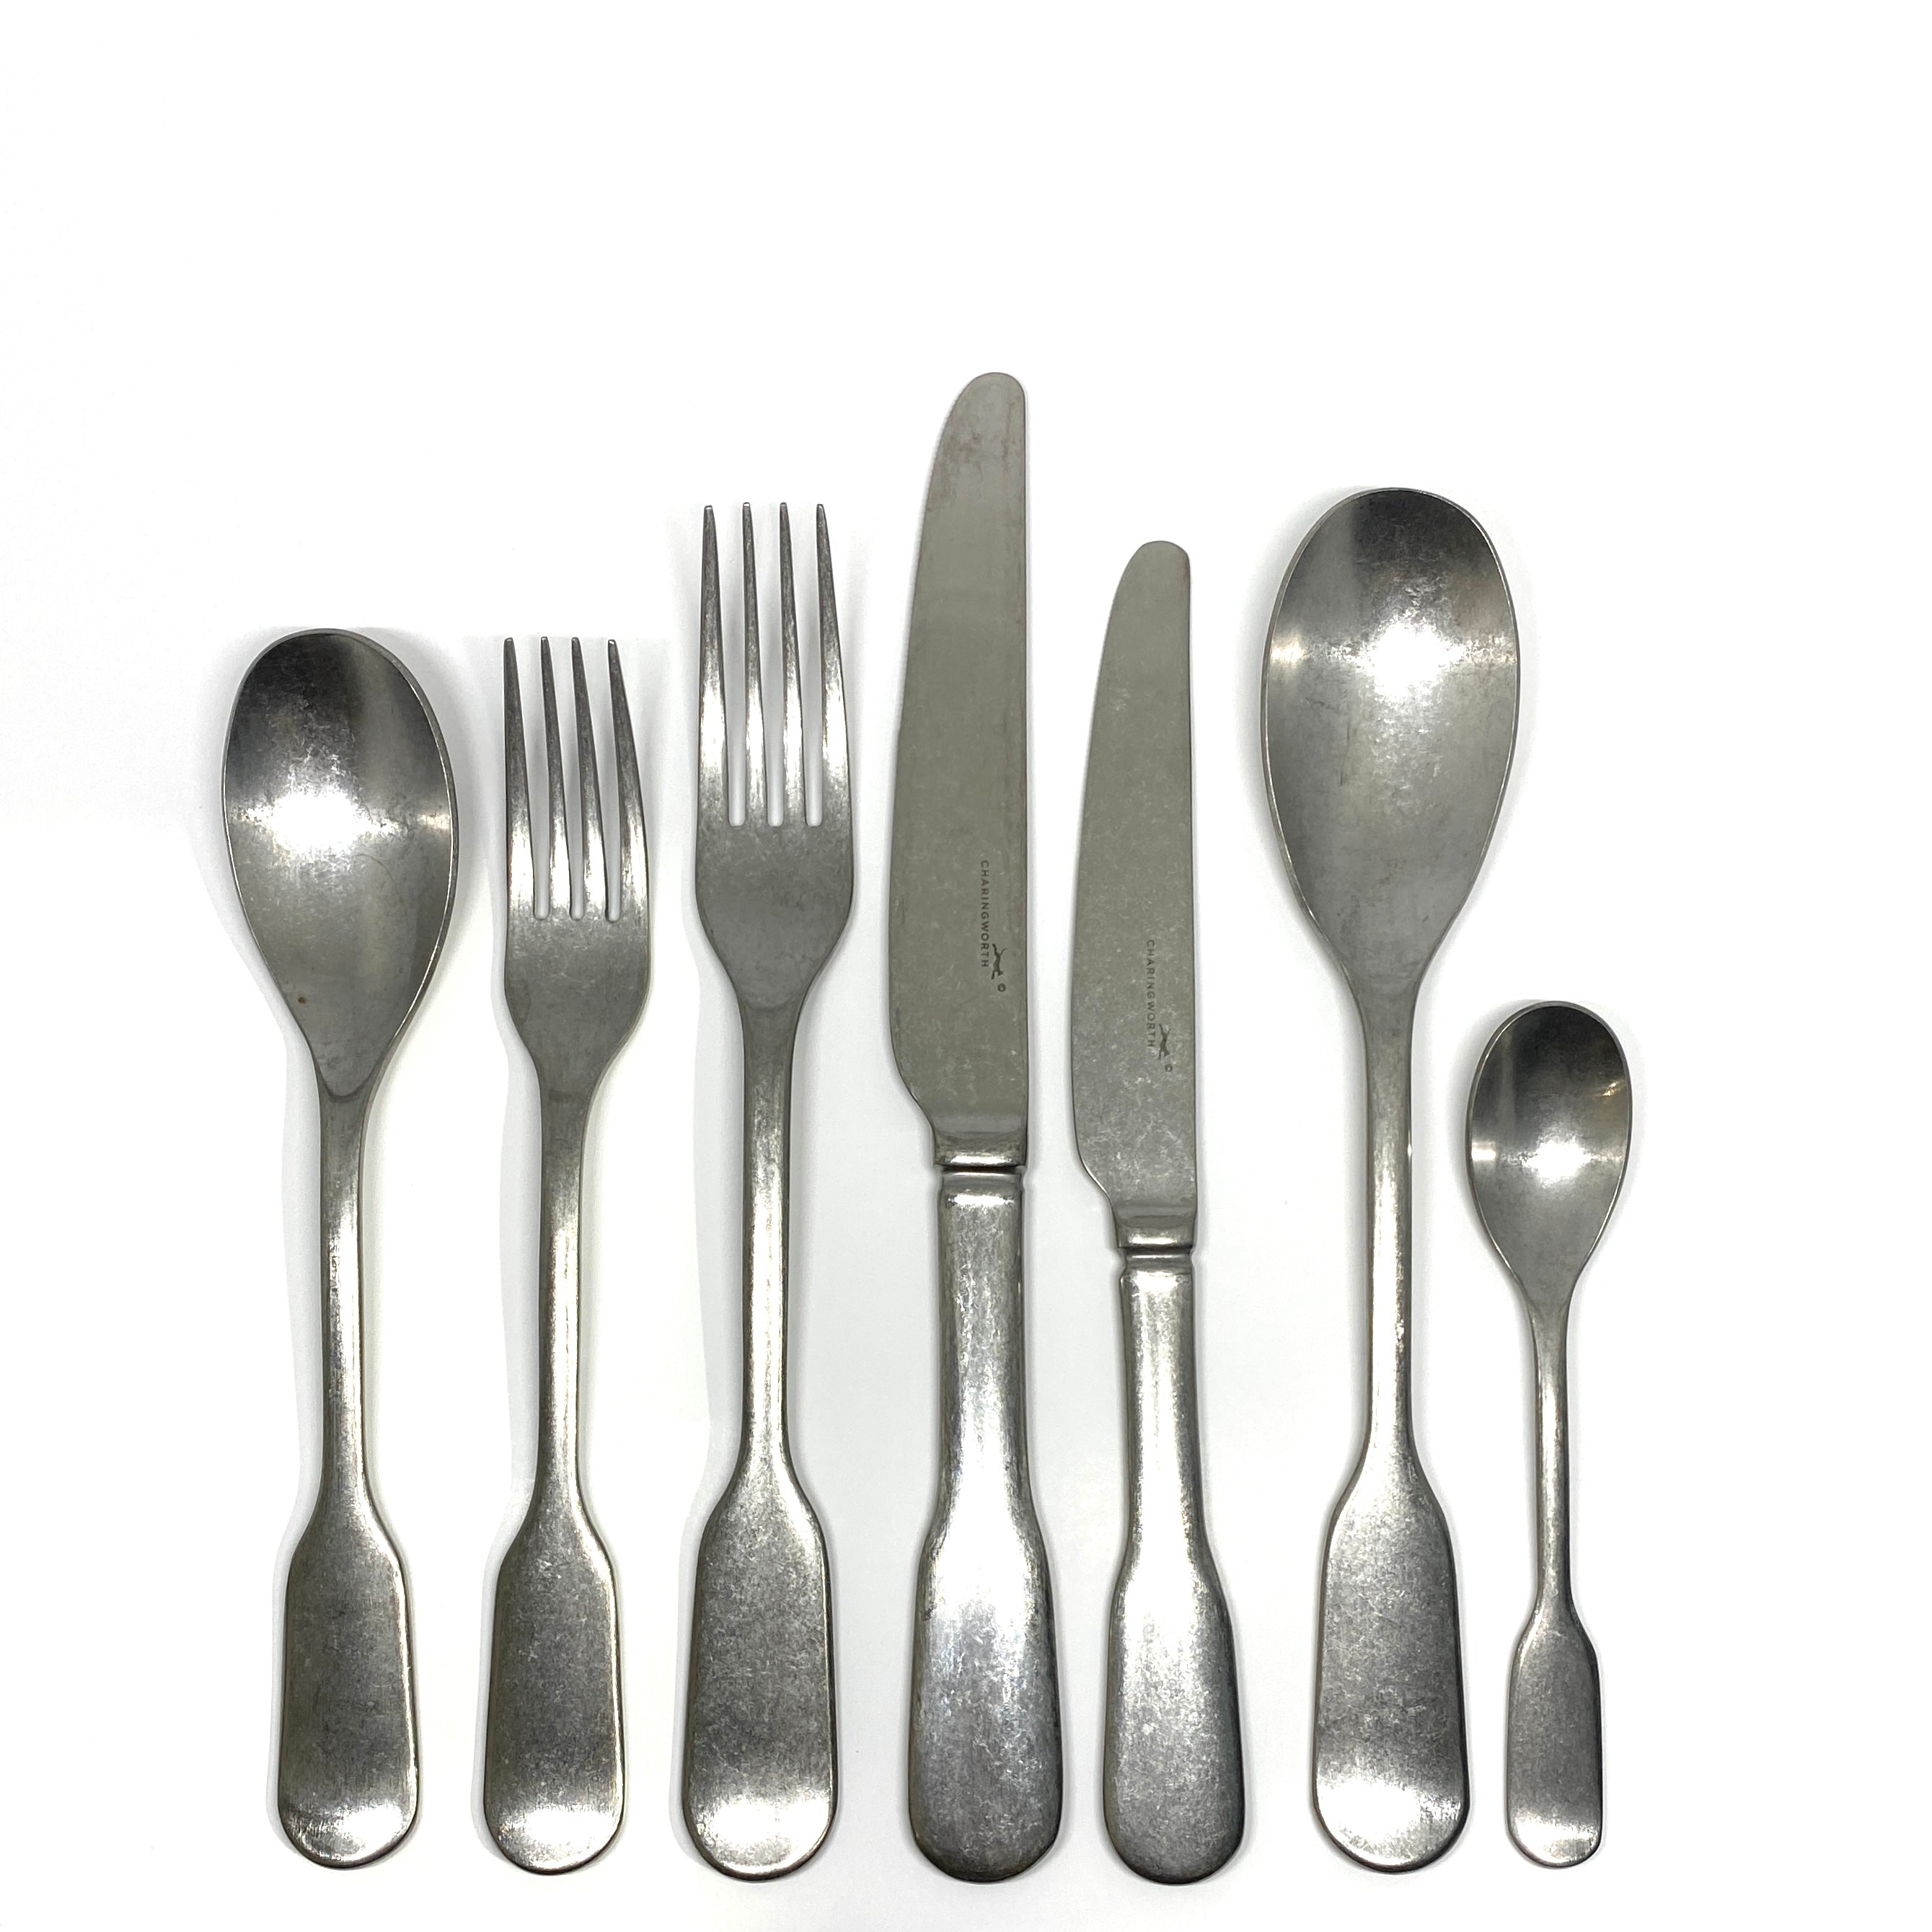 Calais 28 Piece Cutlery Set for four - Vintage Satin Finish - Stainless Steel